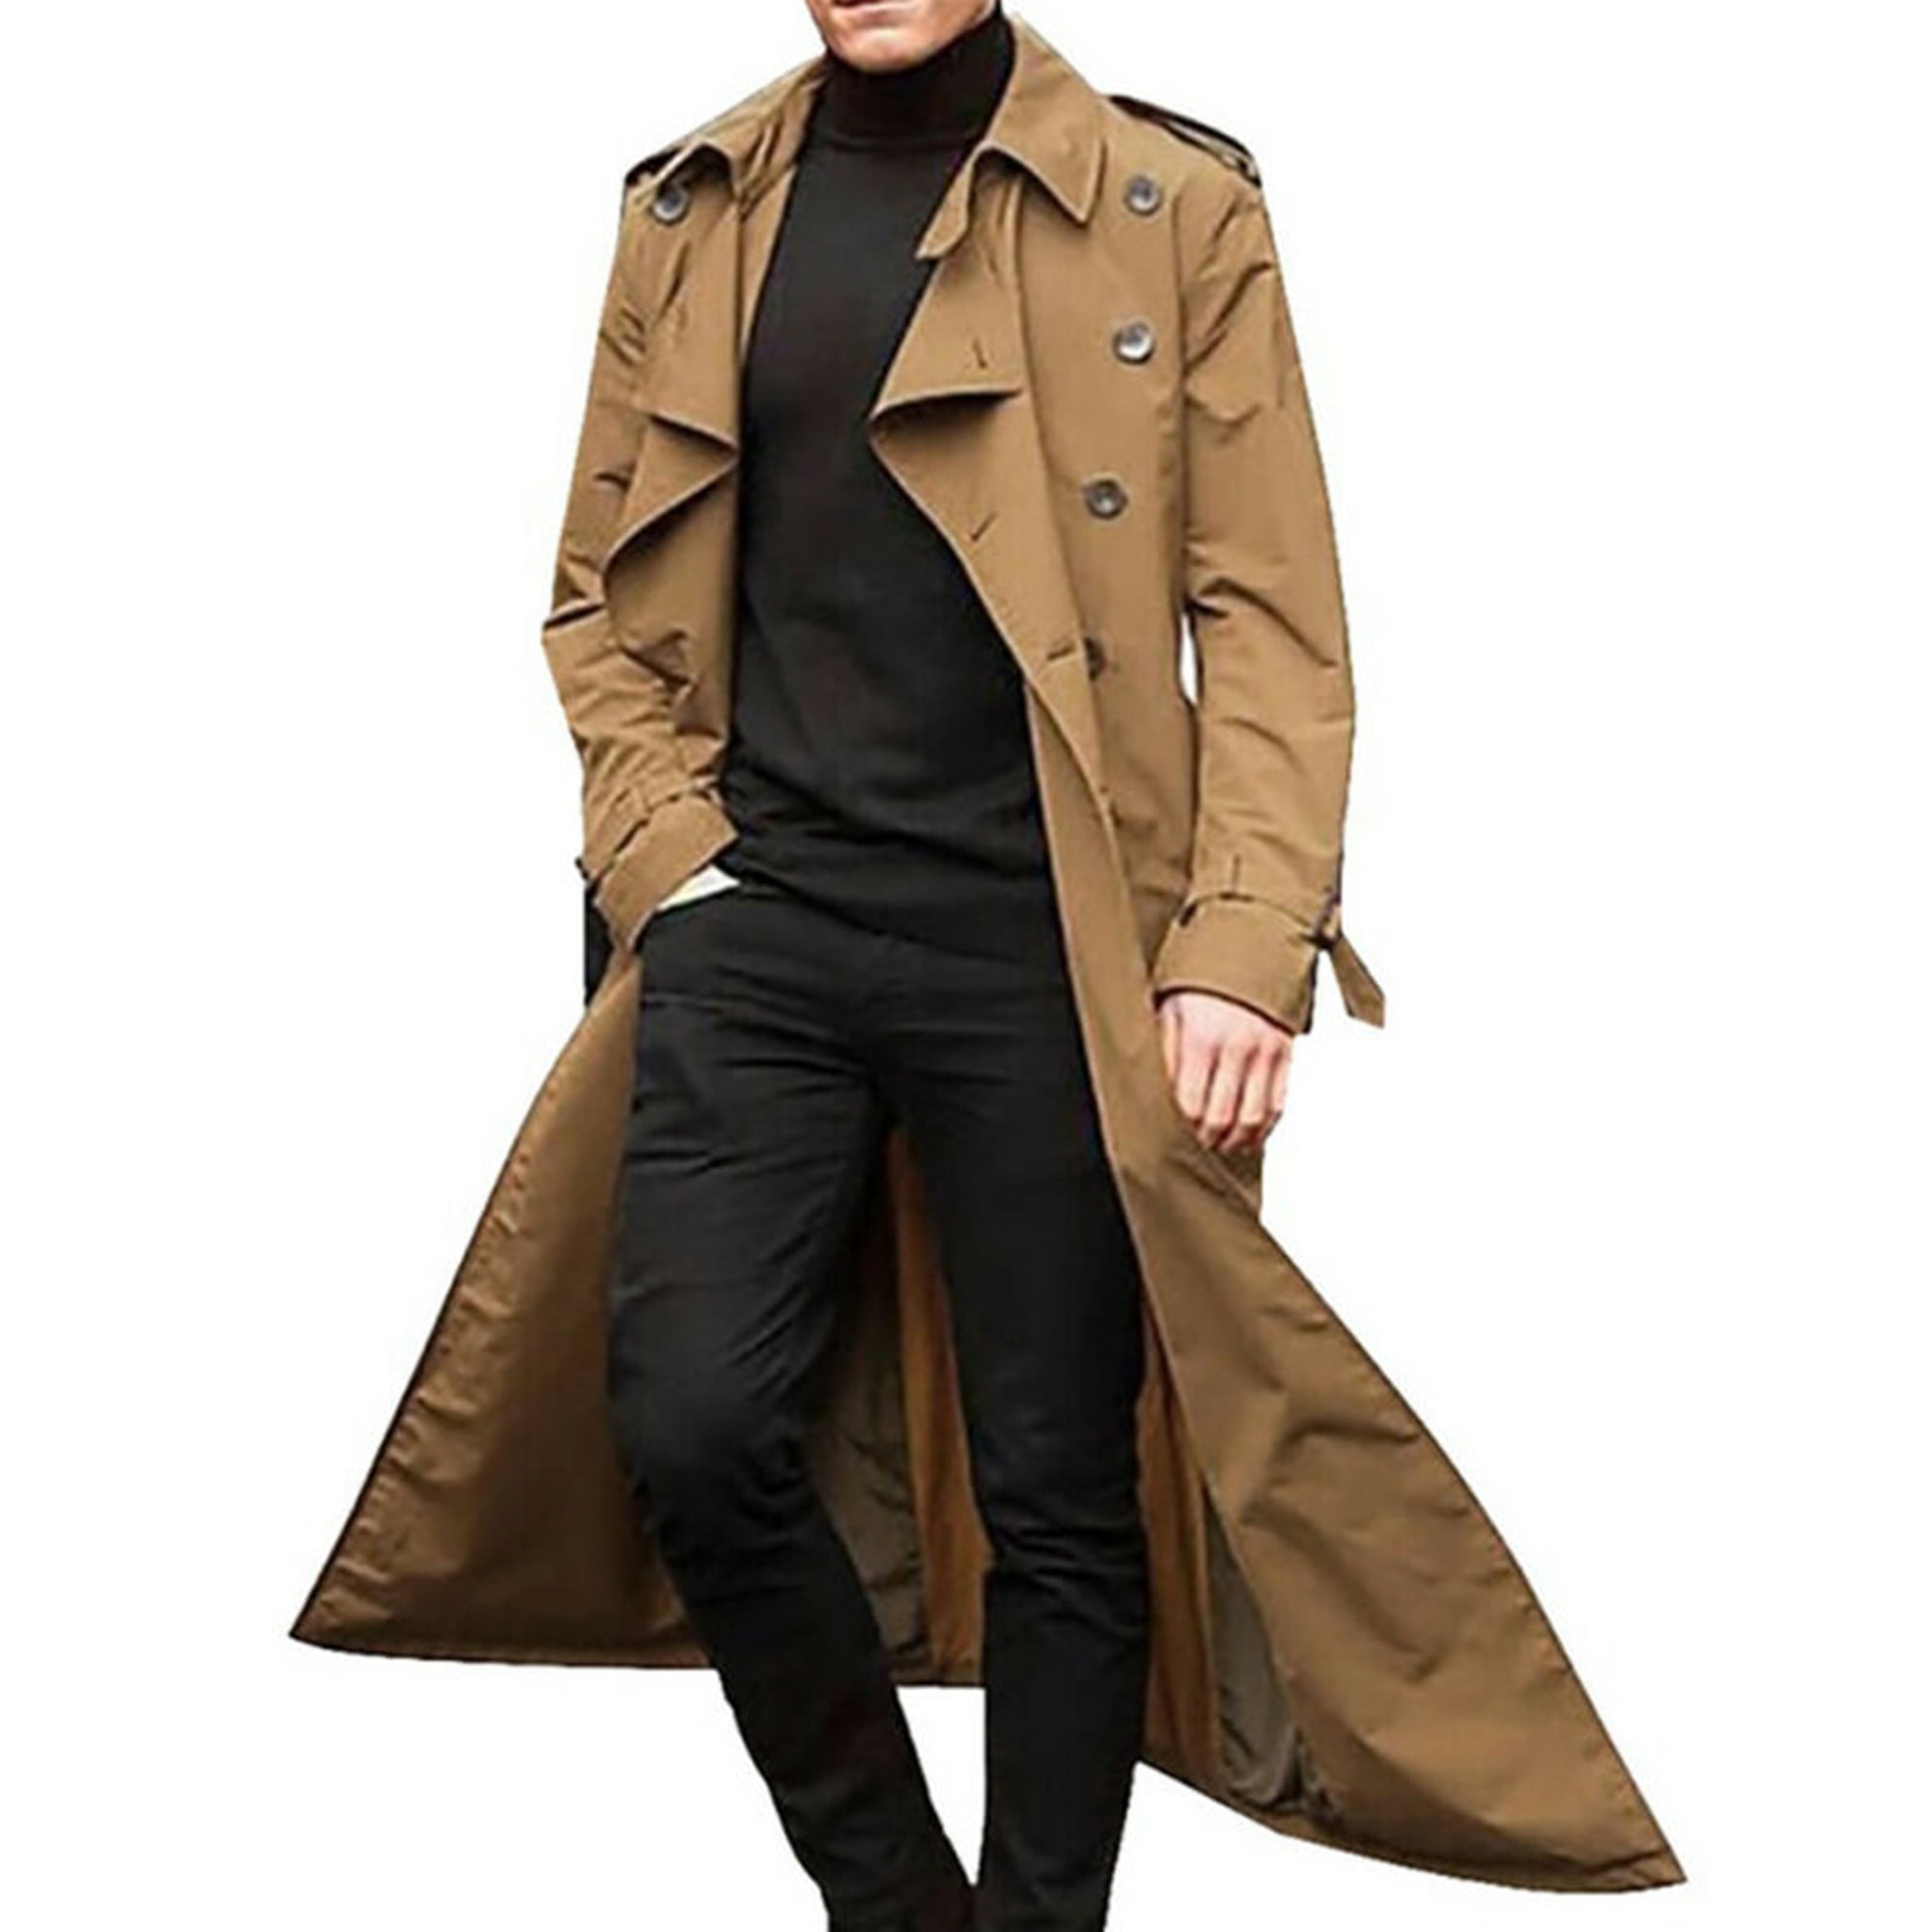 Pandapang Women Belt Double-Breasted Lapel Neck Classic Trench Pea Coat Jacket